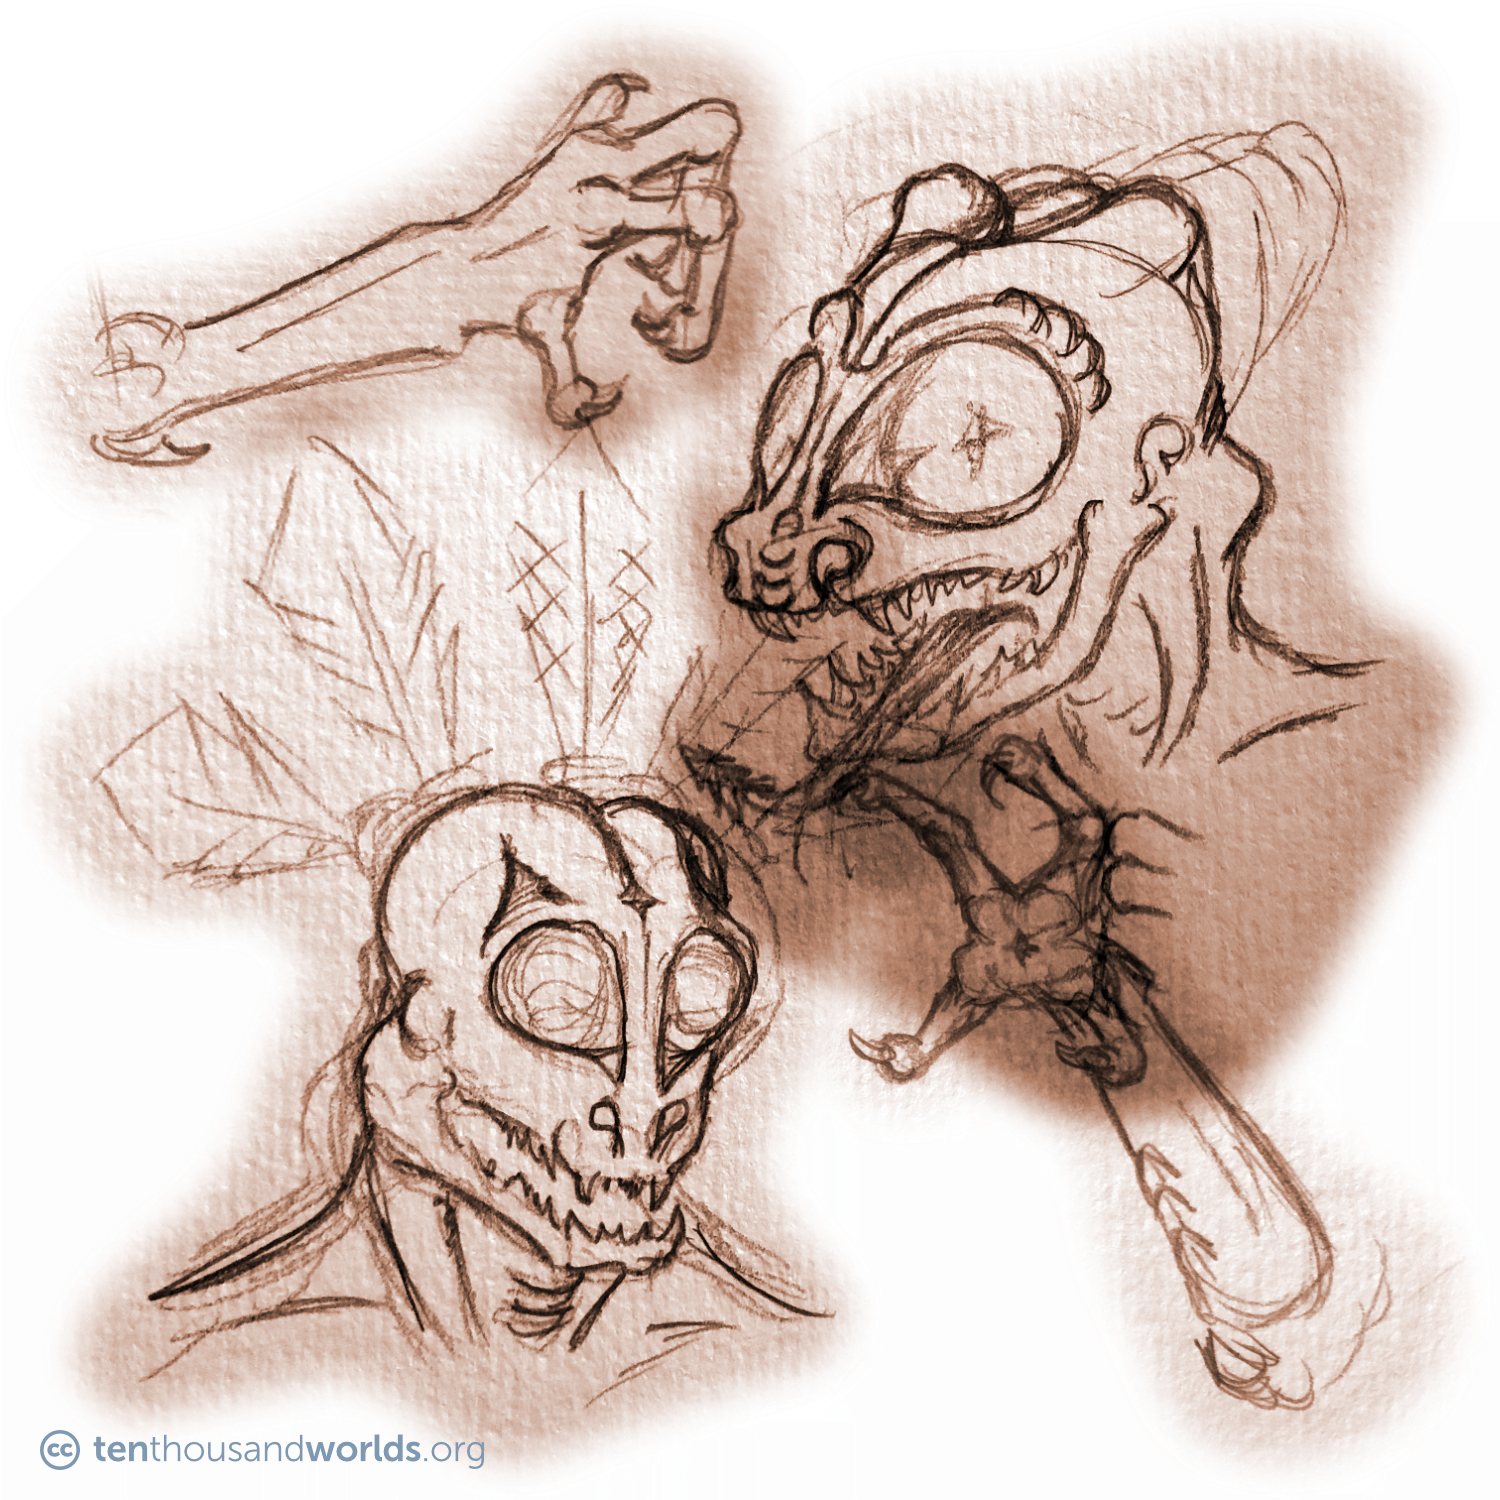 A pair of roughly-sketched, vaguely human-like alien heads with skeletal and reptilian features, and very large eyes. Nearby are four-digit clawed hands and/or feet.